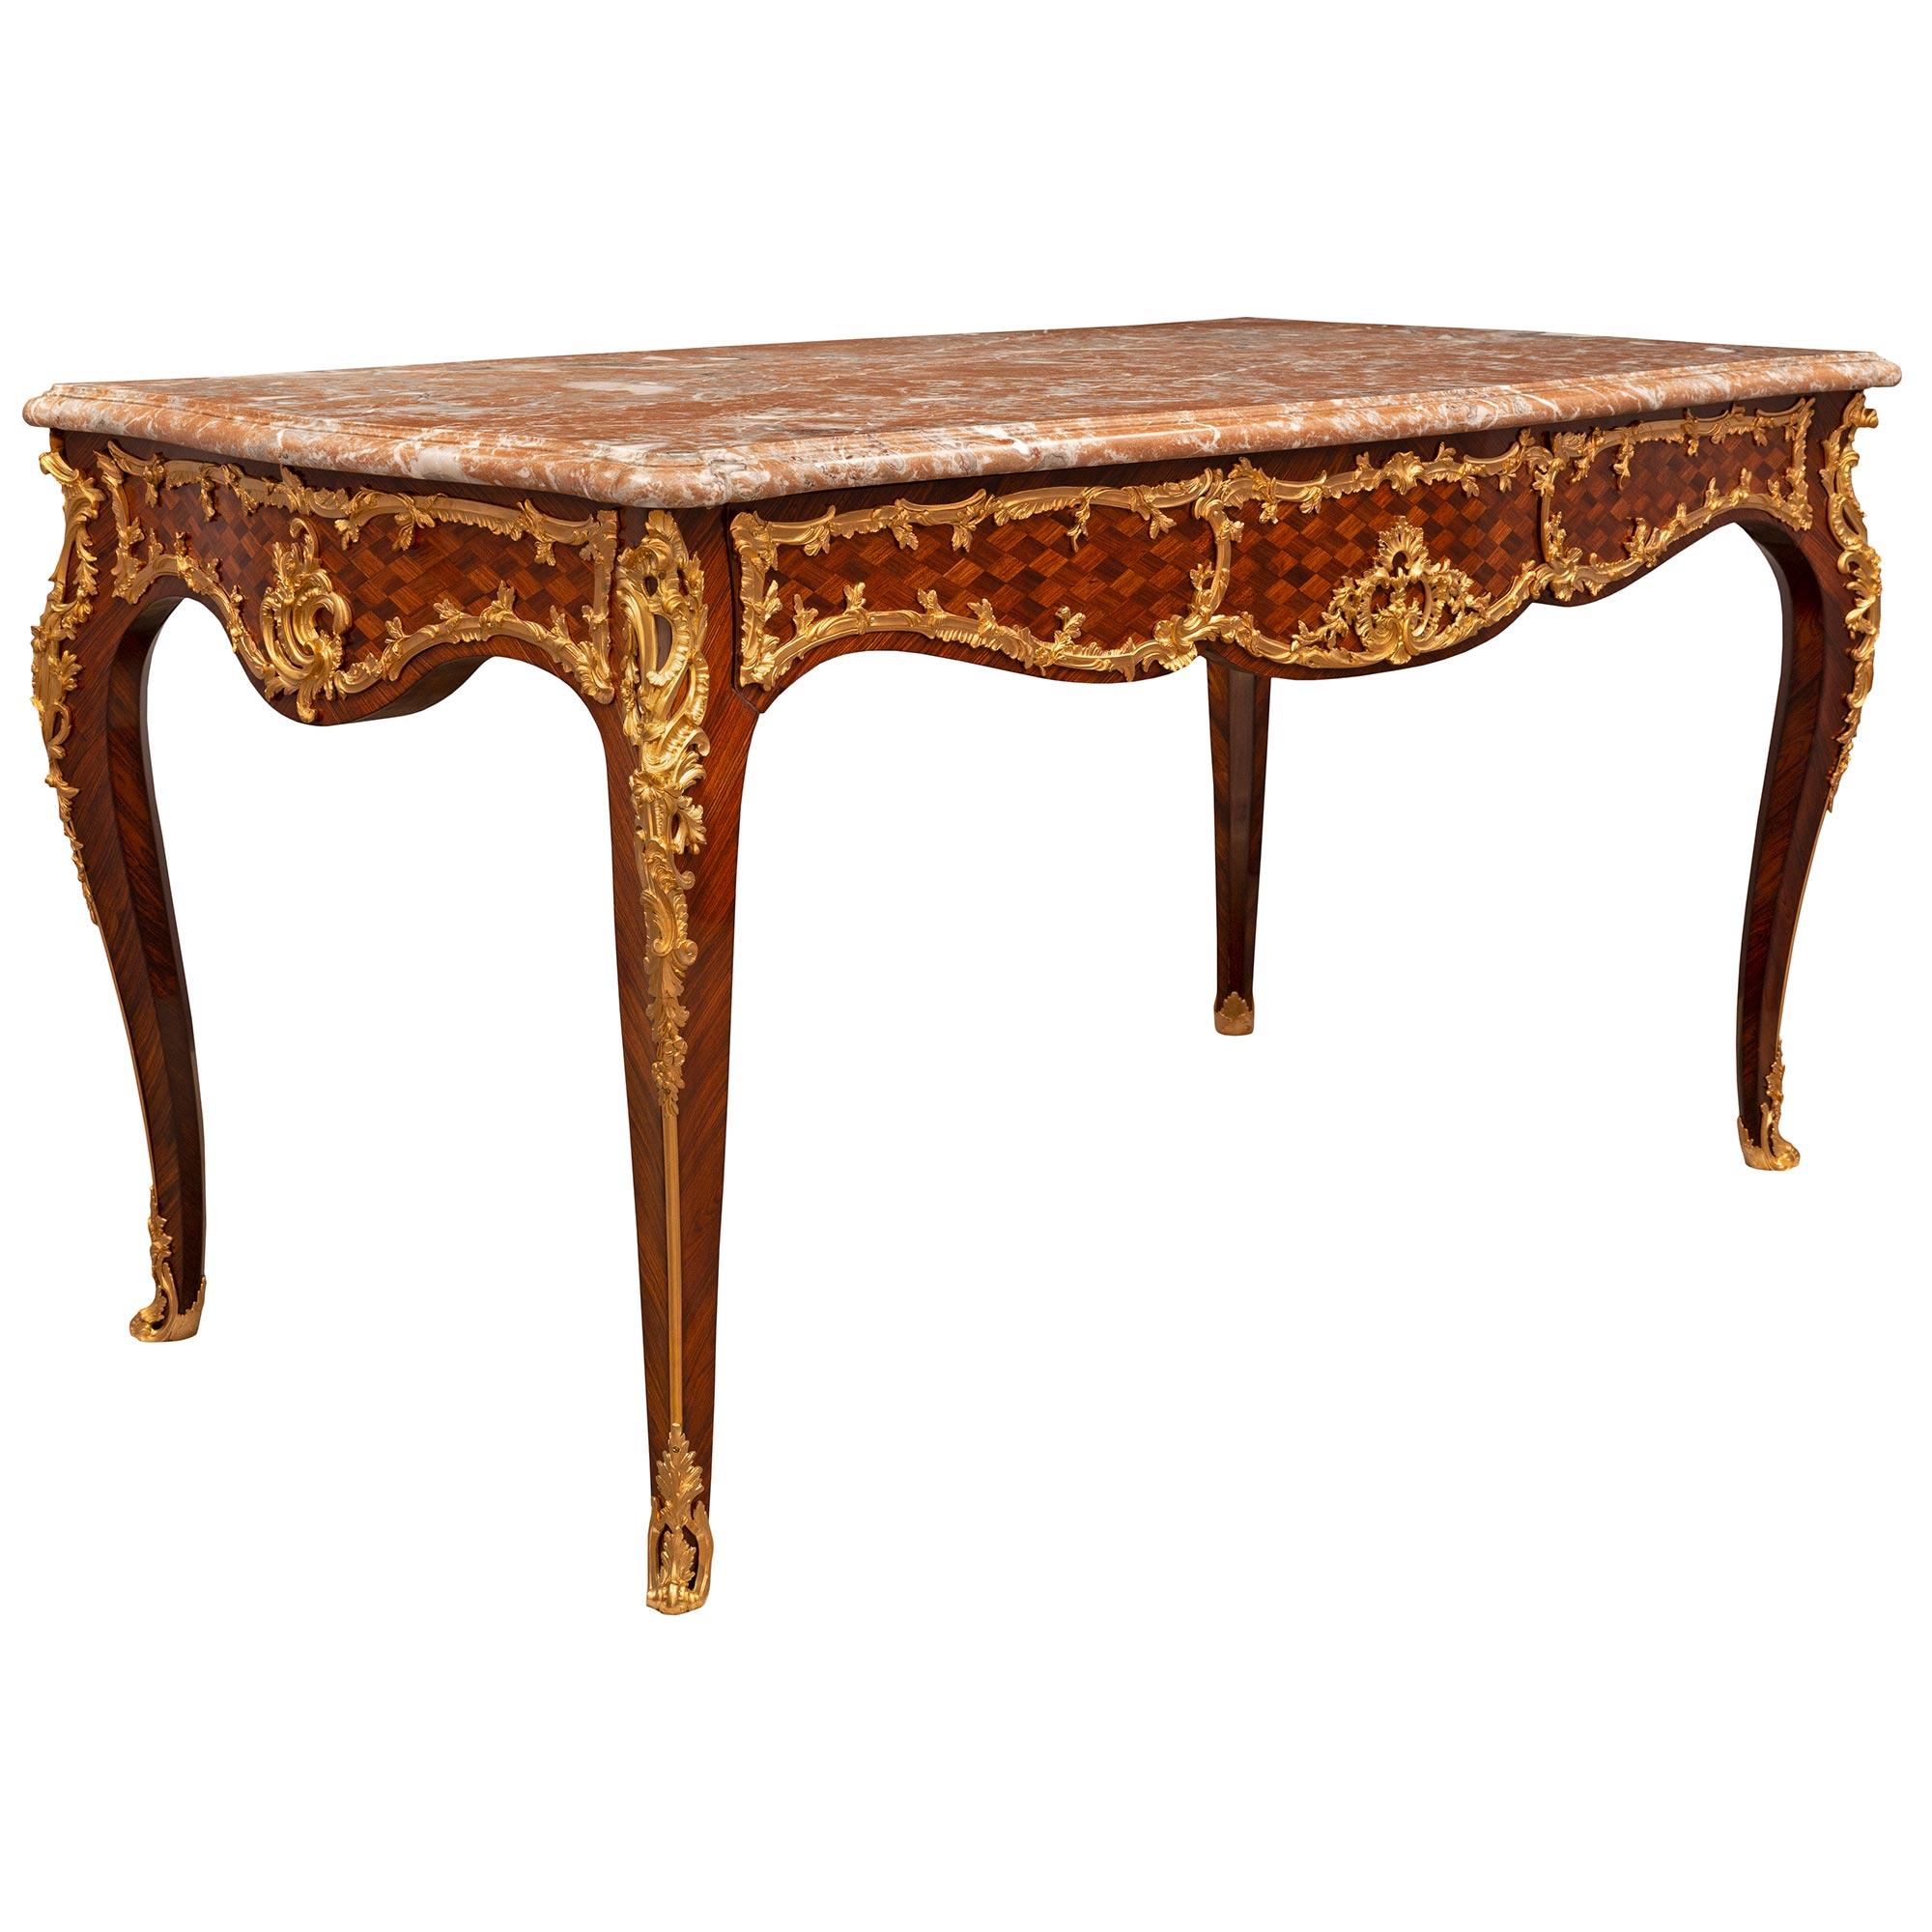 French 19th Century Louis XV Style Tulipwood and Ormolu Center Table In Good Condition For Sale In West Palm Beach, FL